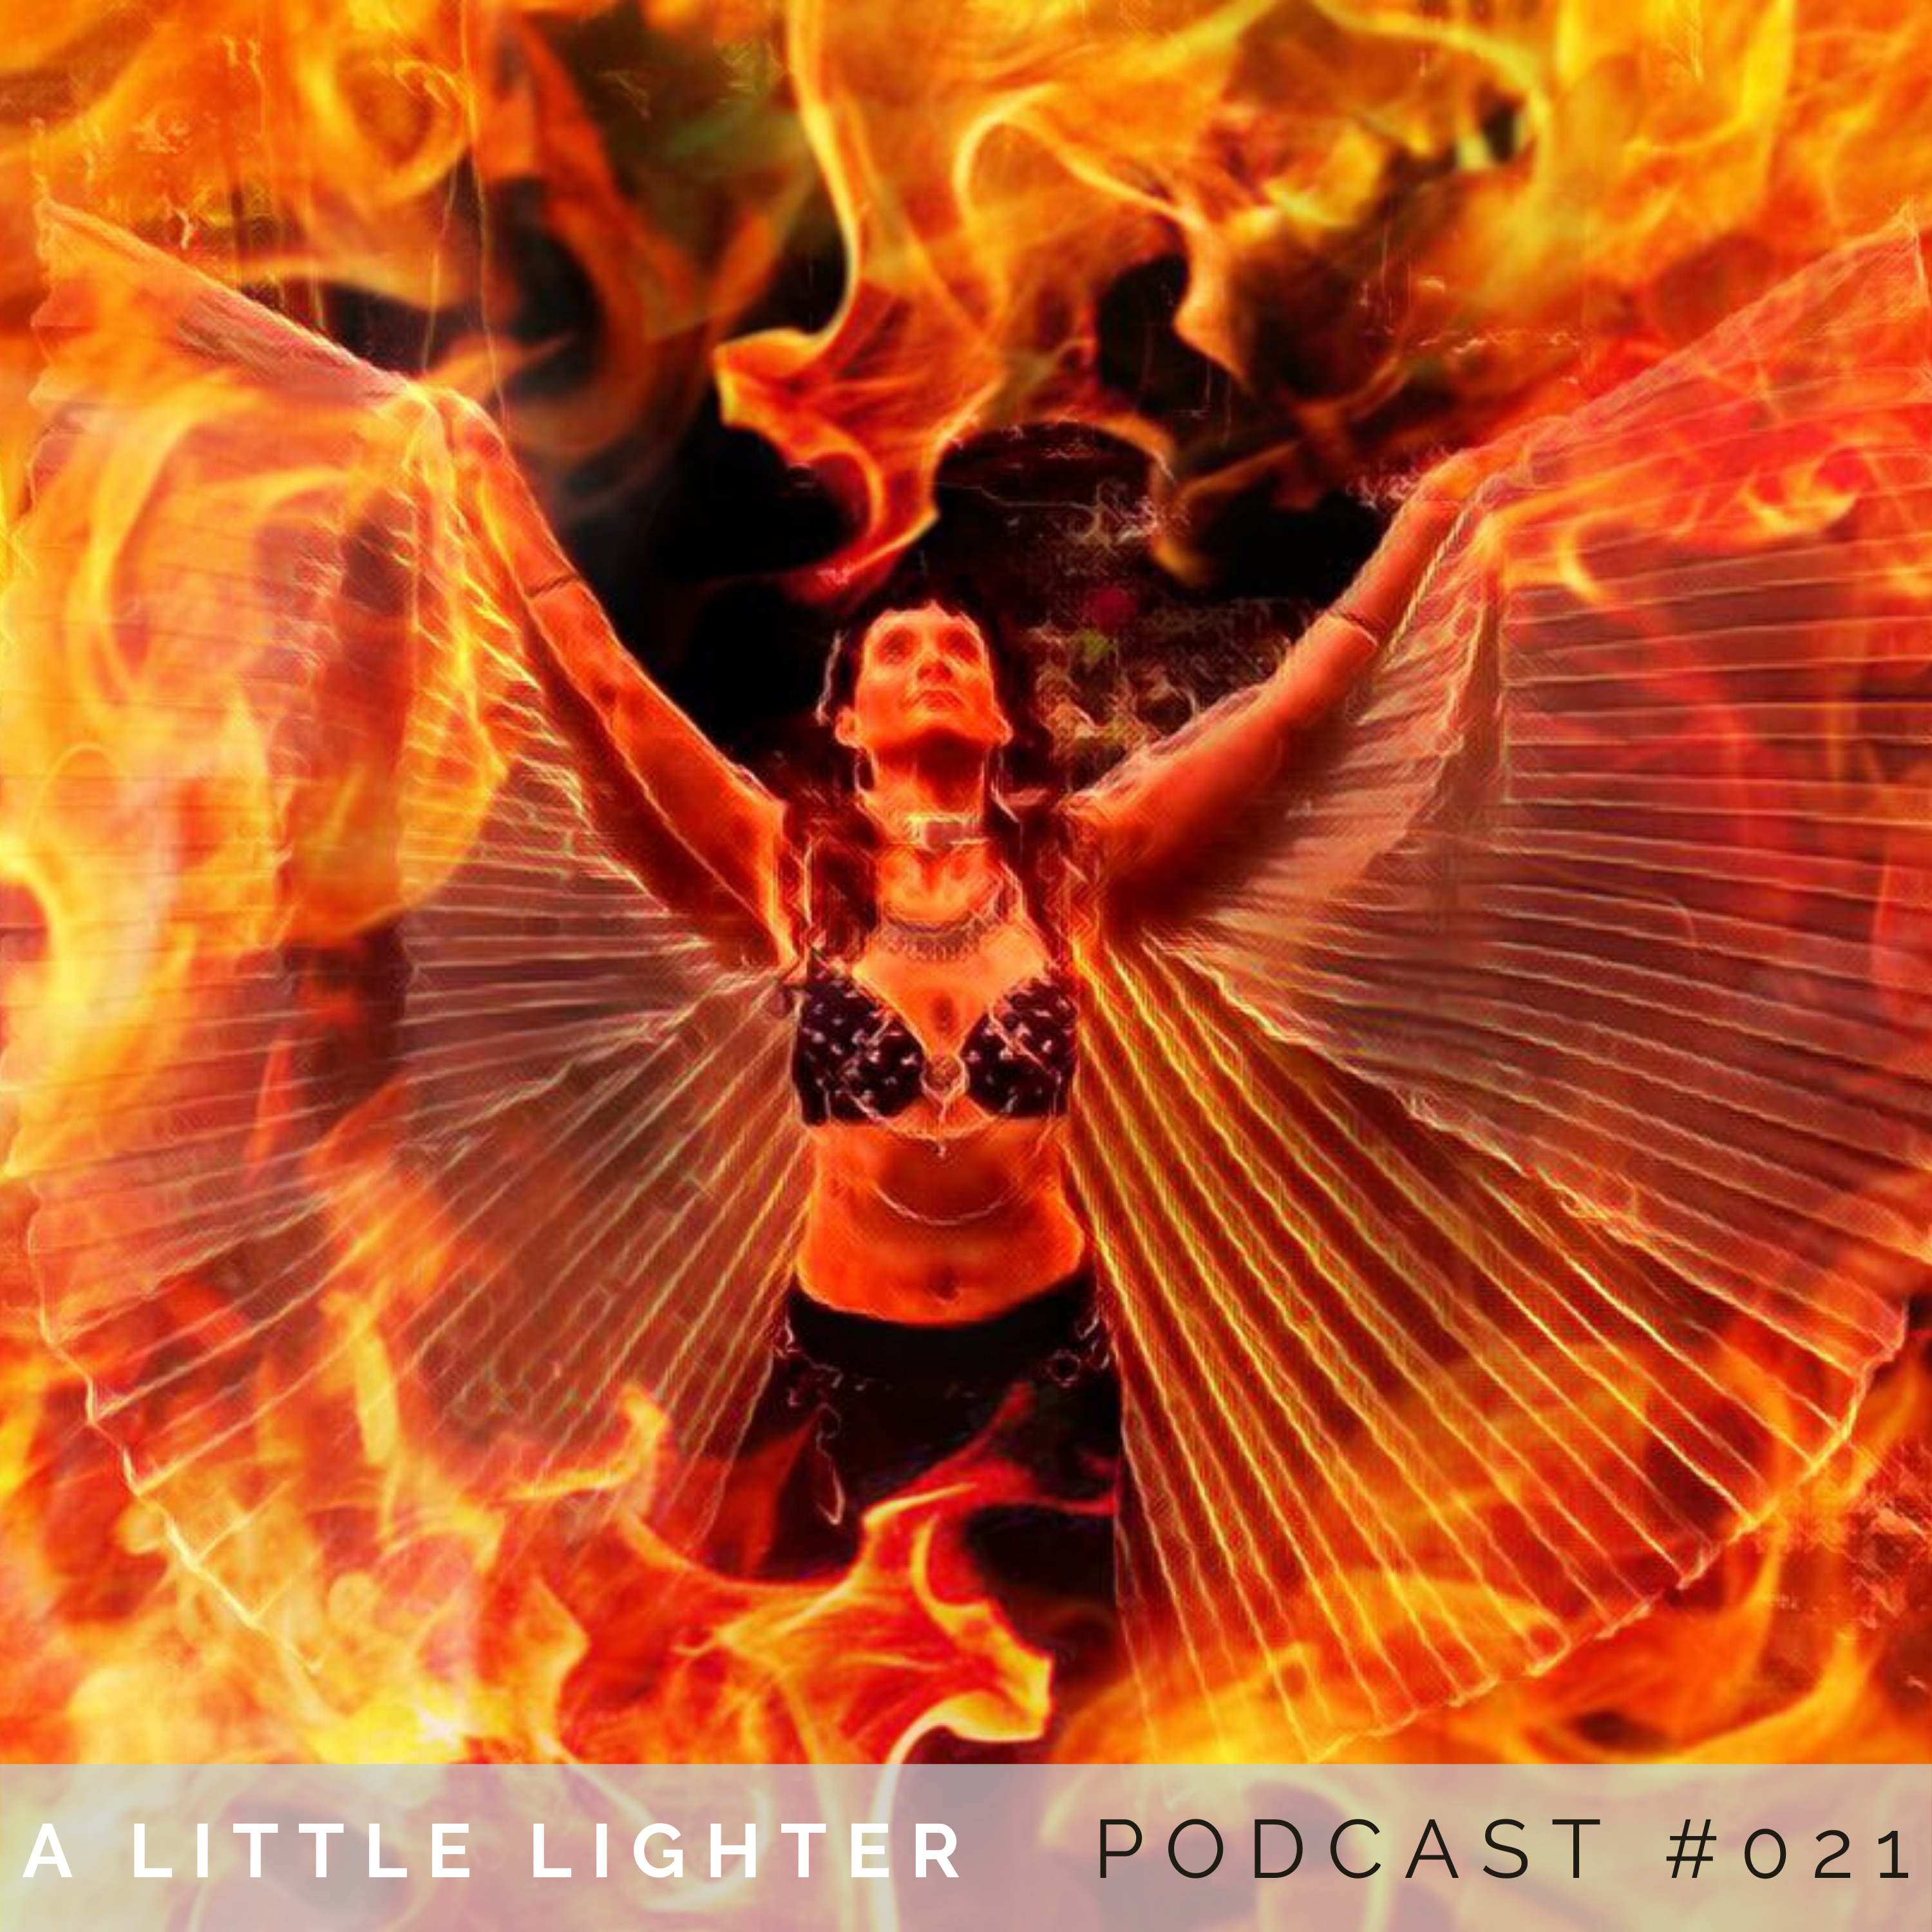 Belly Dance Podcast dancing around fire